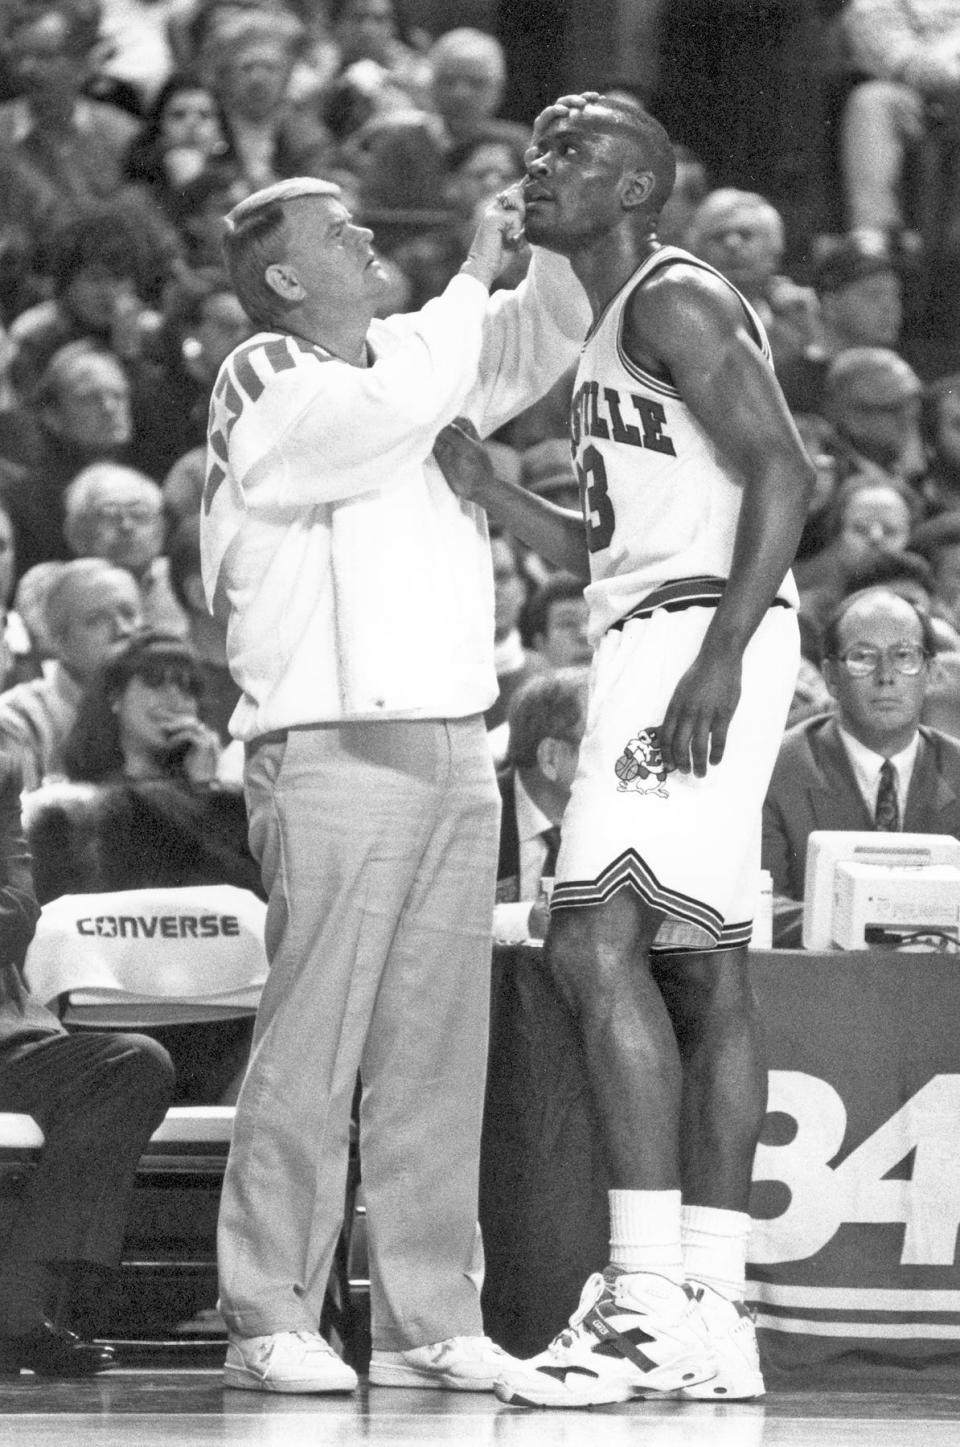 Jerry May, left, the longtime assistant athletic director for sports medicine at the University of Louisville, tends to Greg Minor during a men's basketball game in the early 1990s. May died Sunday at age 72.